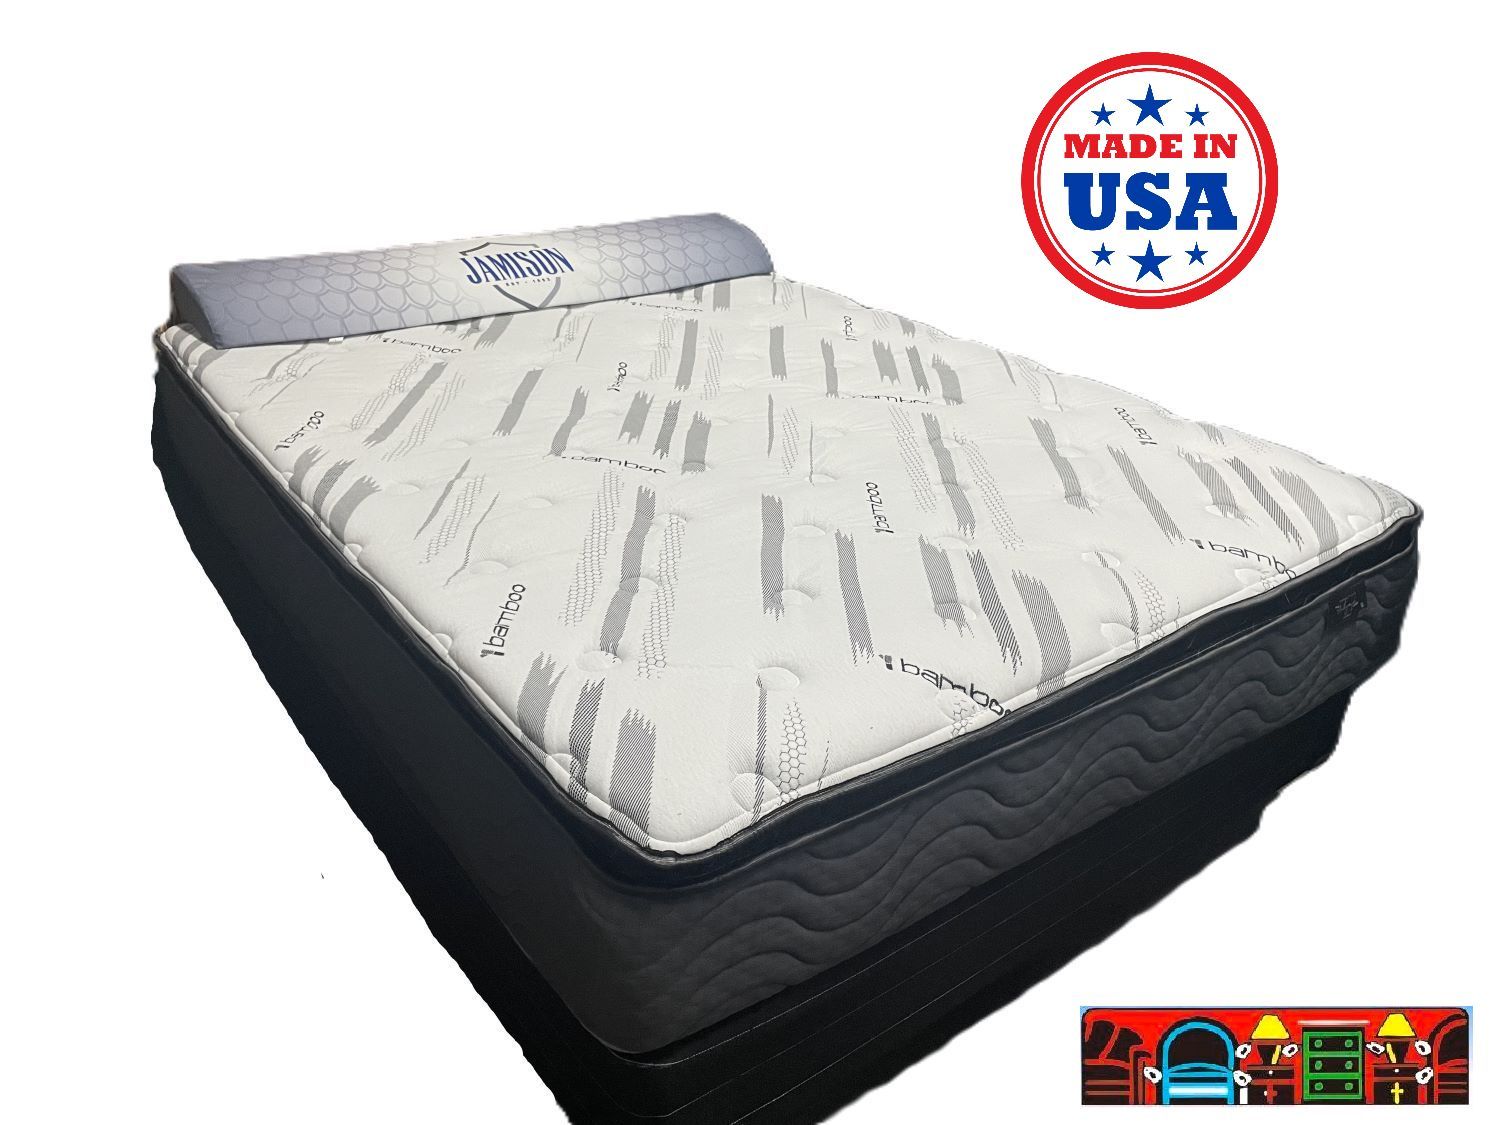 The Jamison Autograph Series Liberty Park pillow top mattress is available at Bratz-CFW in Fort Myers, FL.